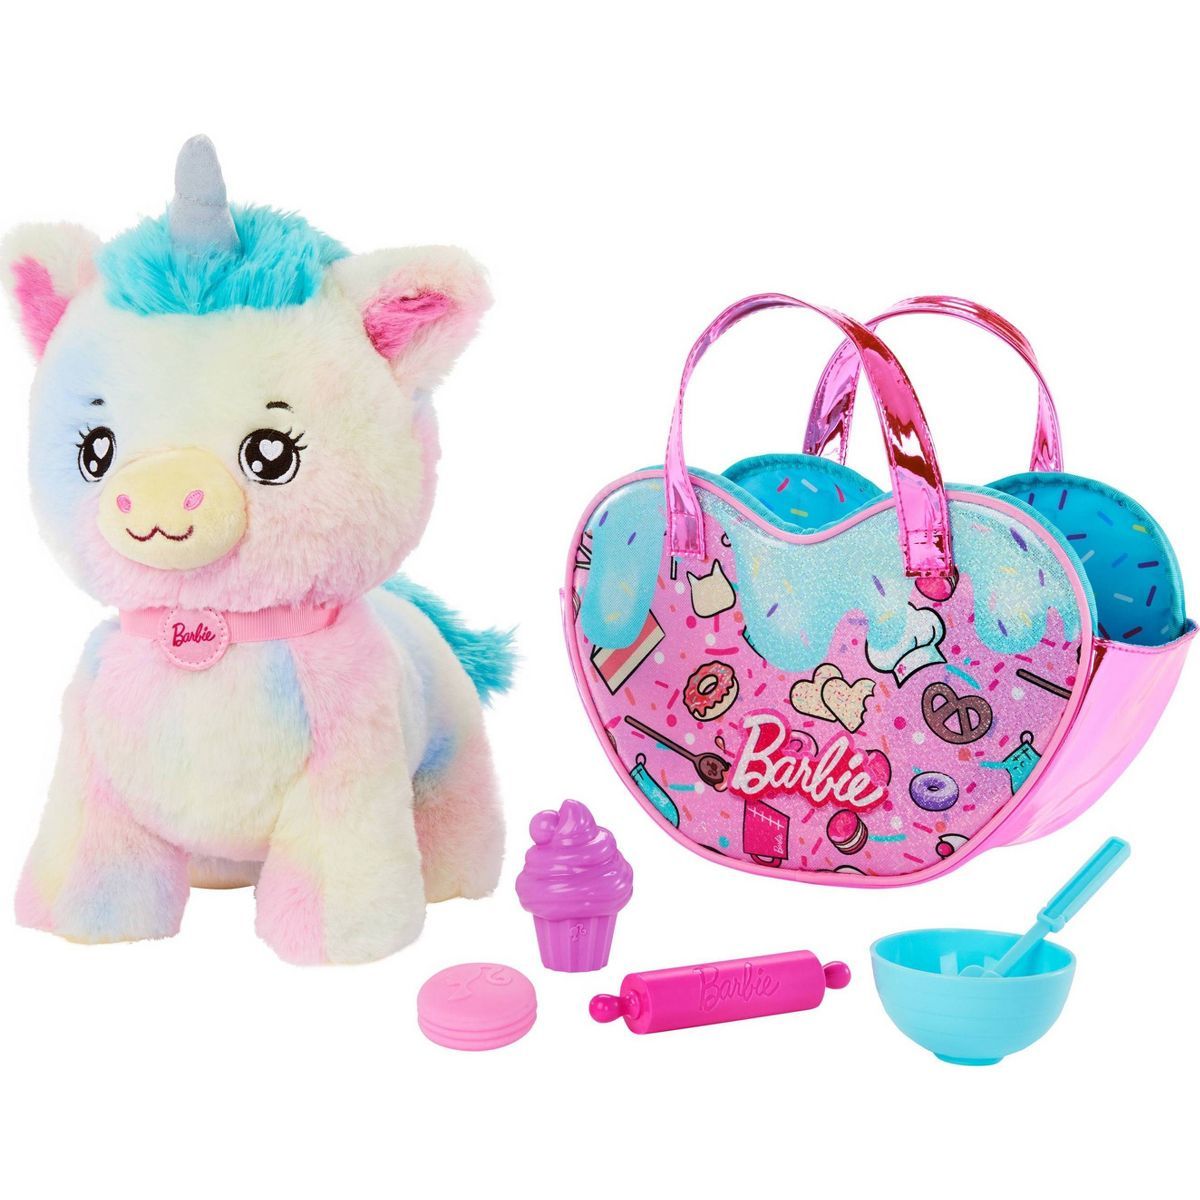 Barbie Chef Pet Adventure Stuffed Animal, Unicorn Toys, Plush with Purse and 5 Accessories | Target